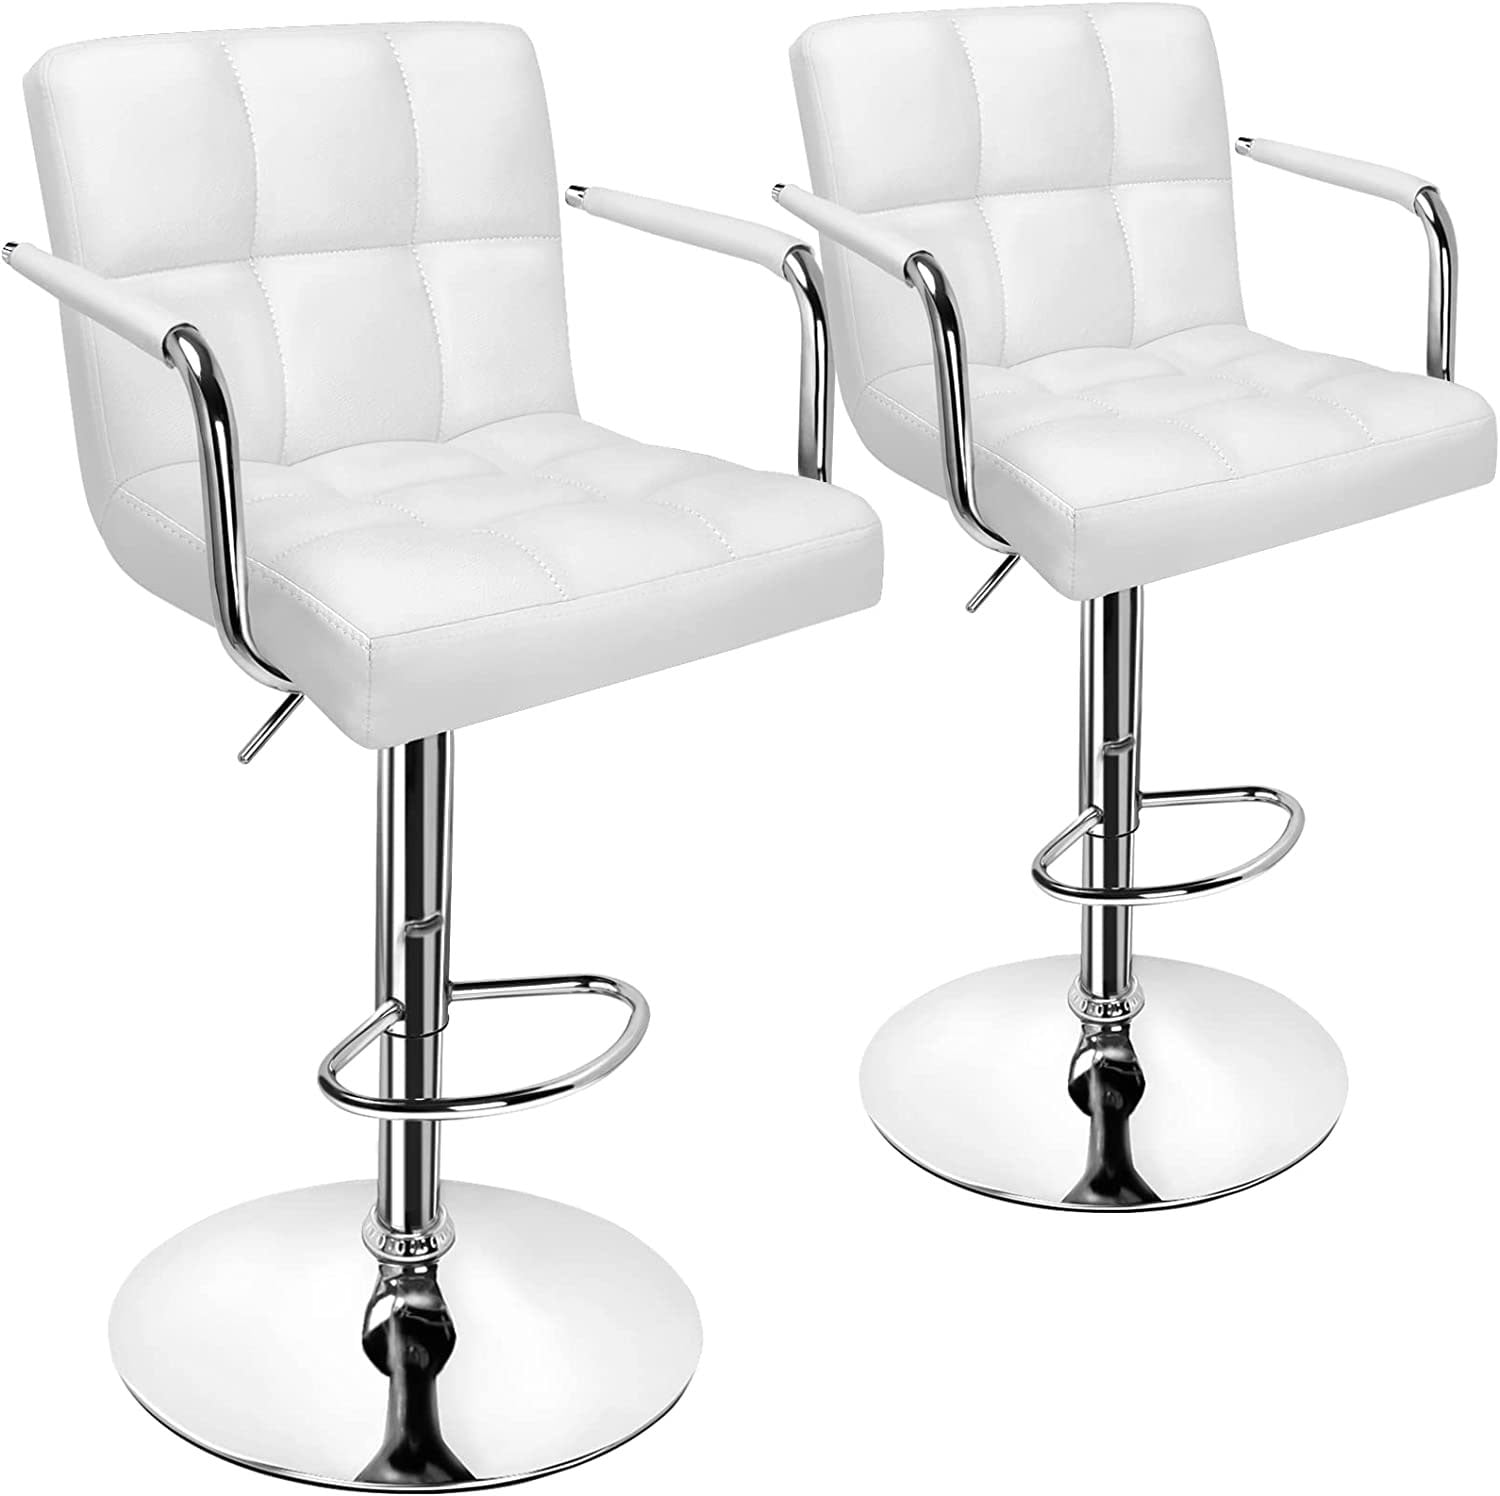 Soontrans Bar Stools With Back And Arms